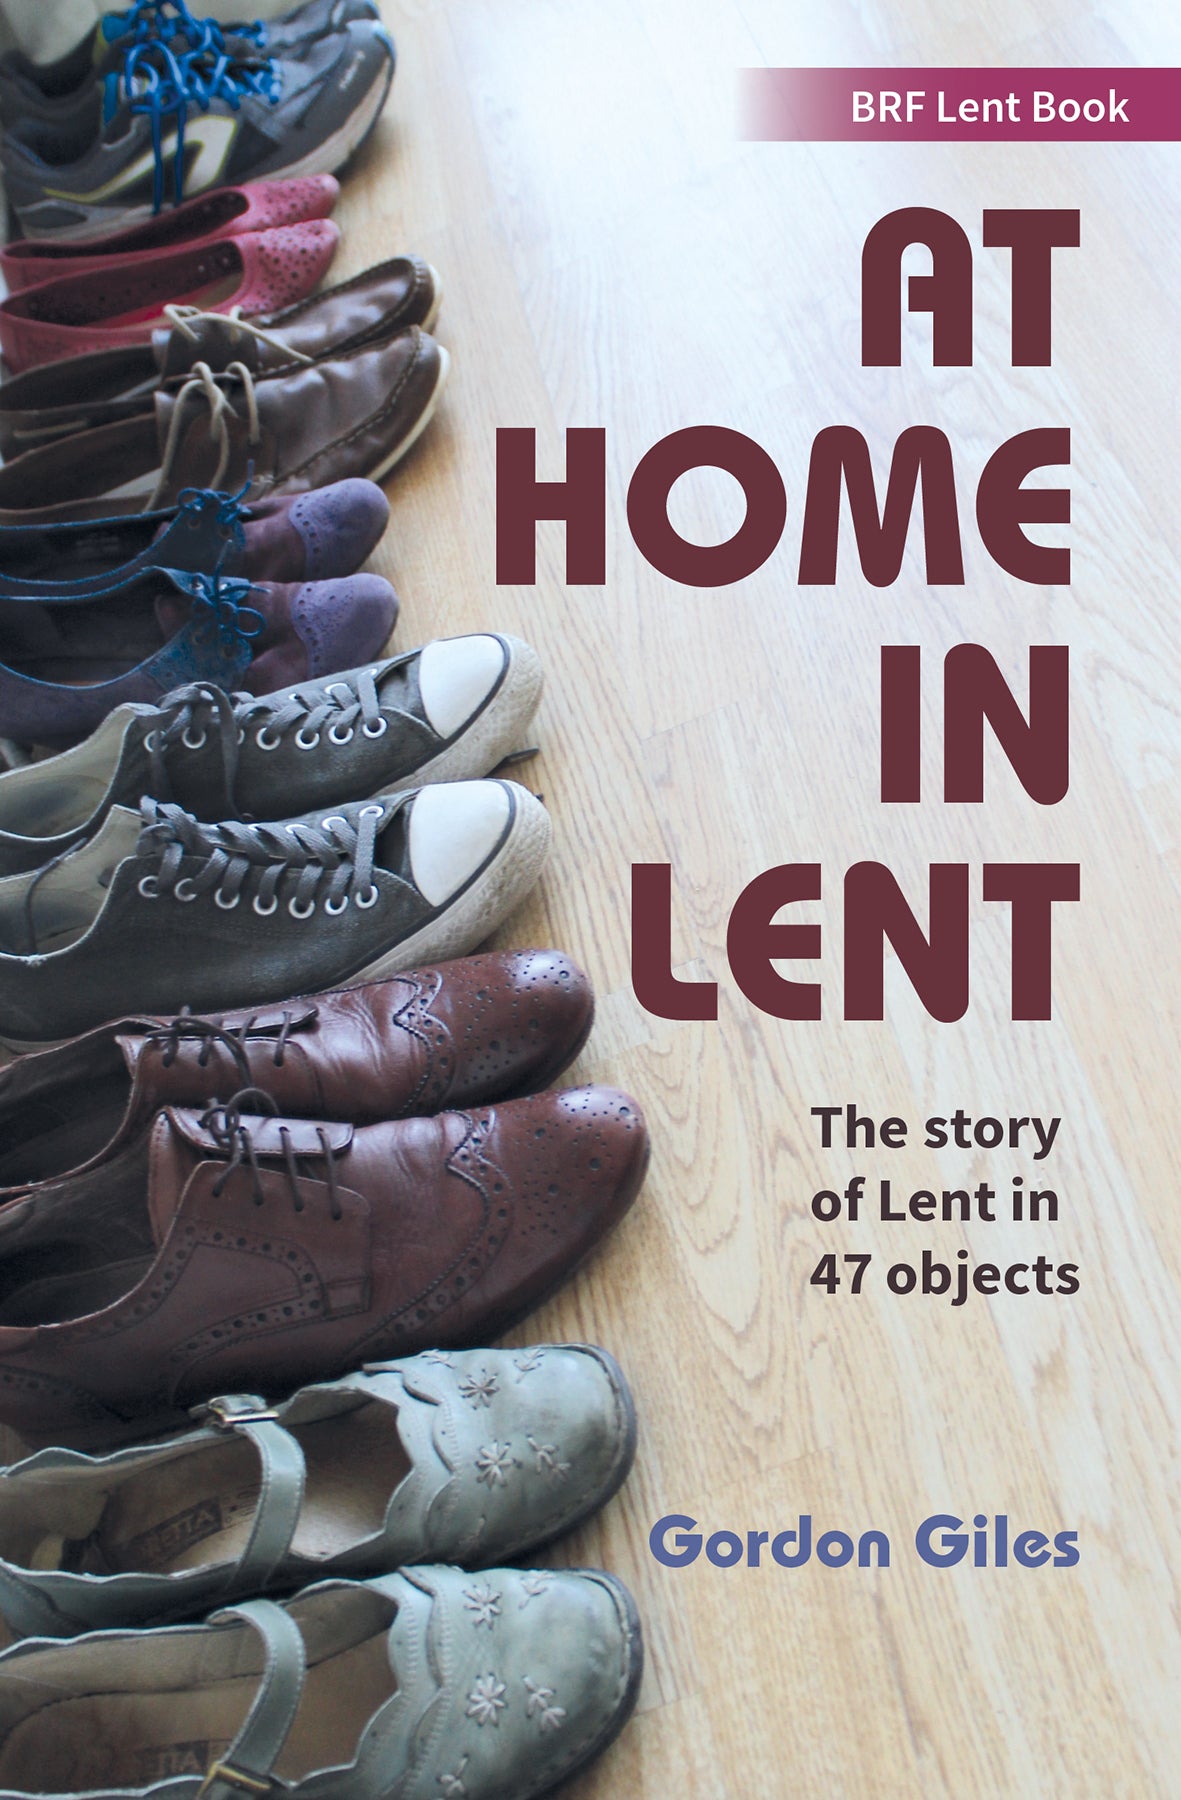 Image of At Home in Lent other